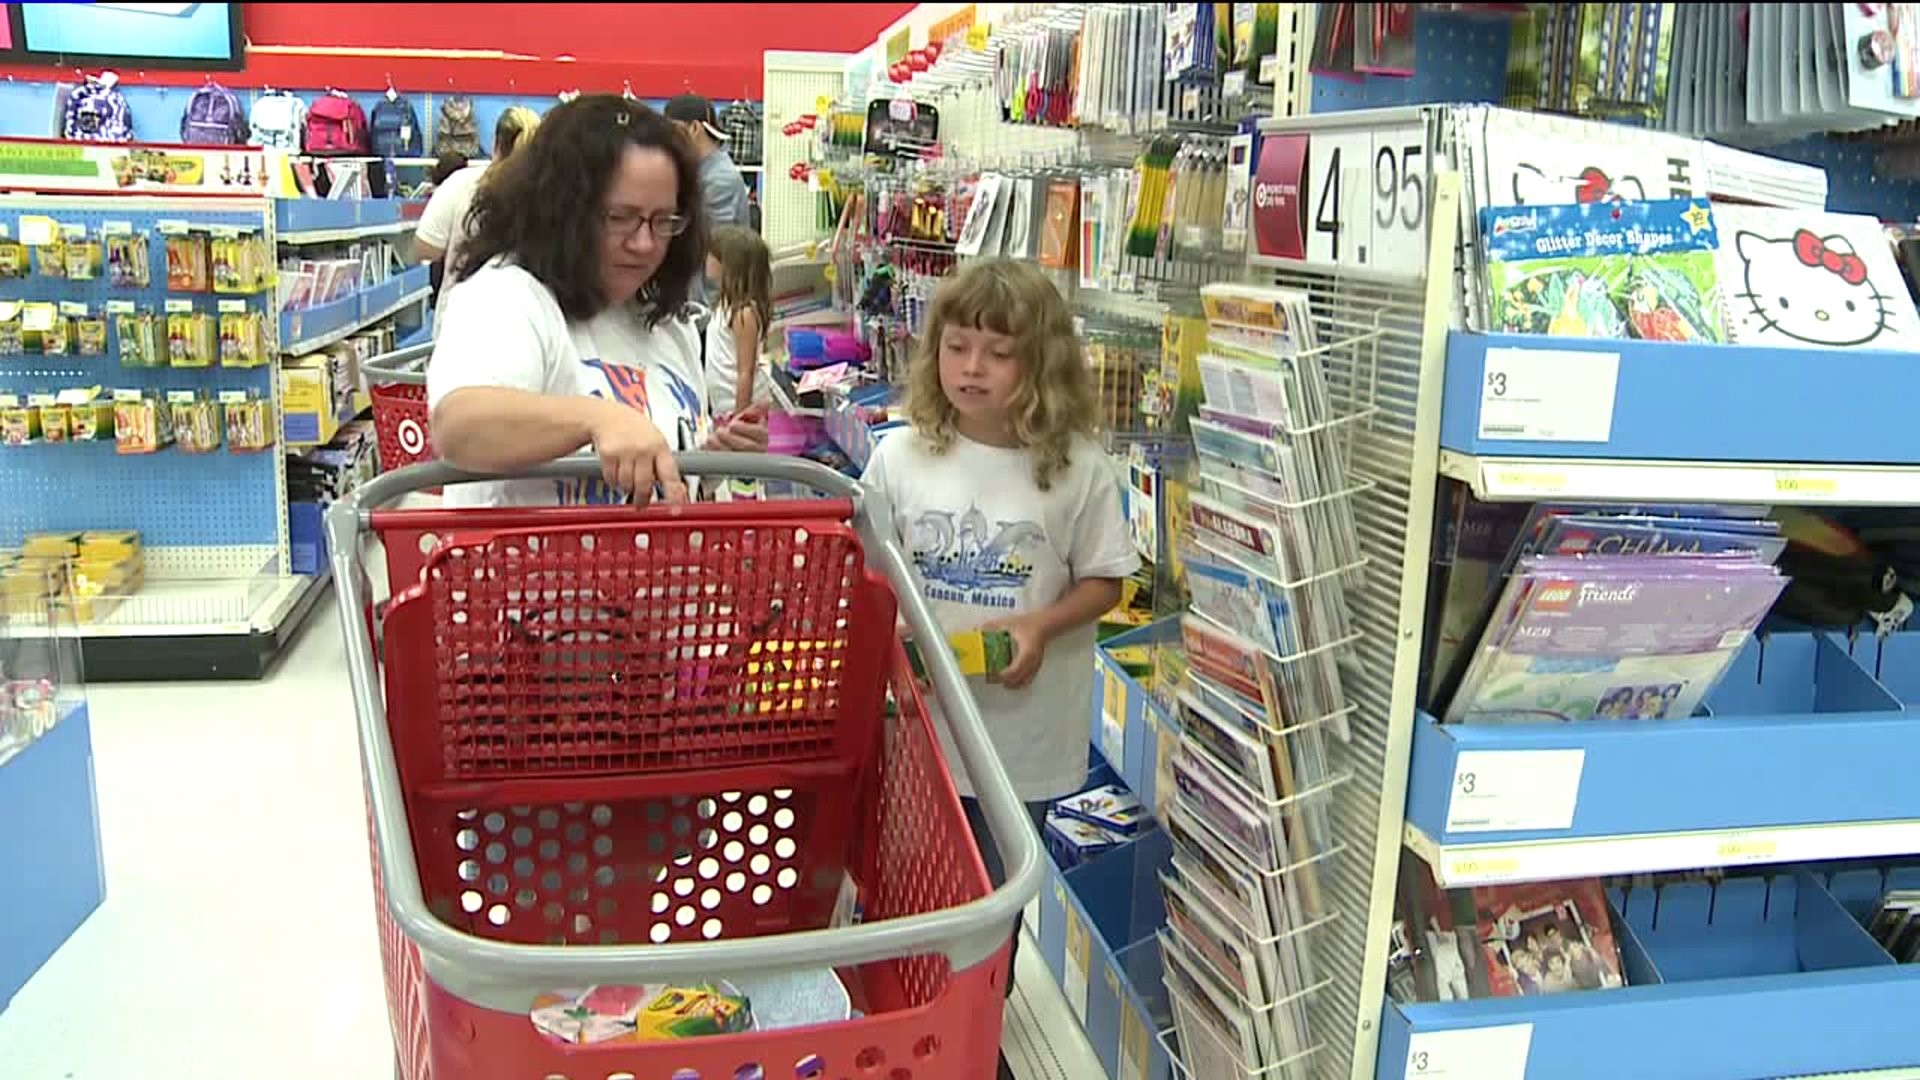 Social Media Hashtag Helping Teachers with Back-to-School Shopping